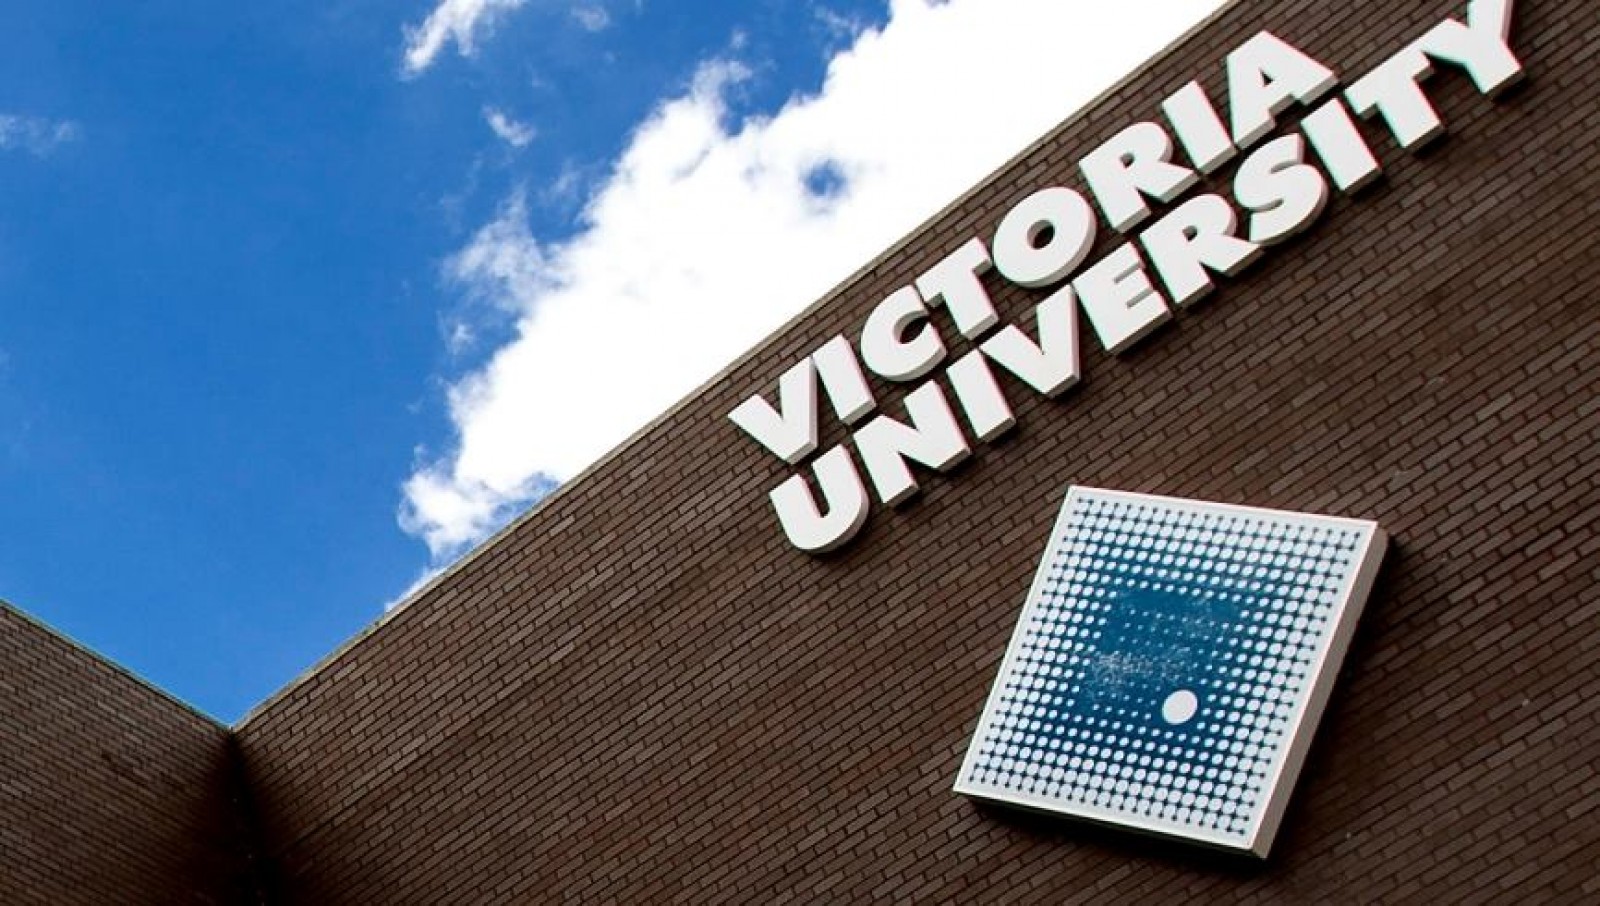 The Survey of Interest and Desire to study for Doctorate Degree at Victoria University, Australia